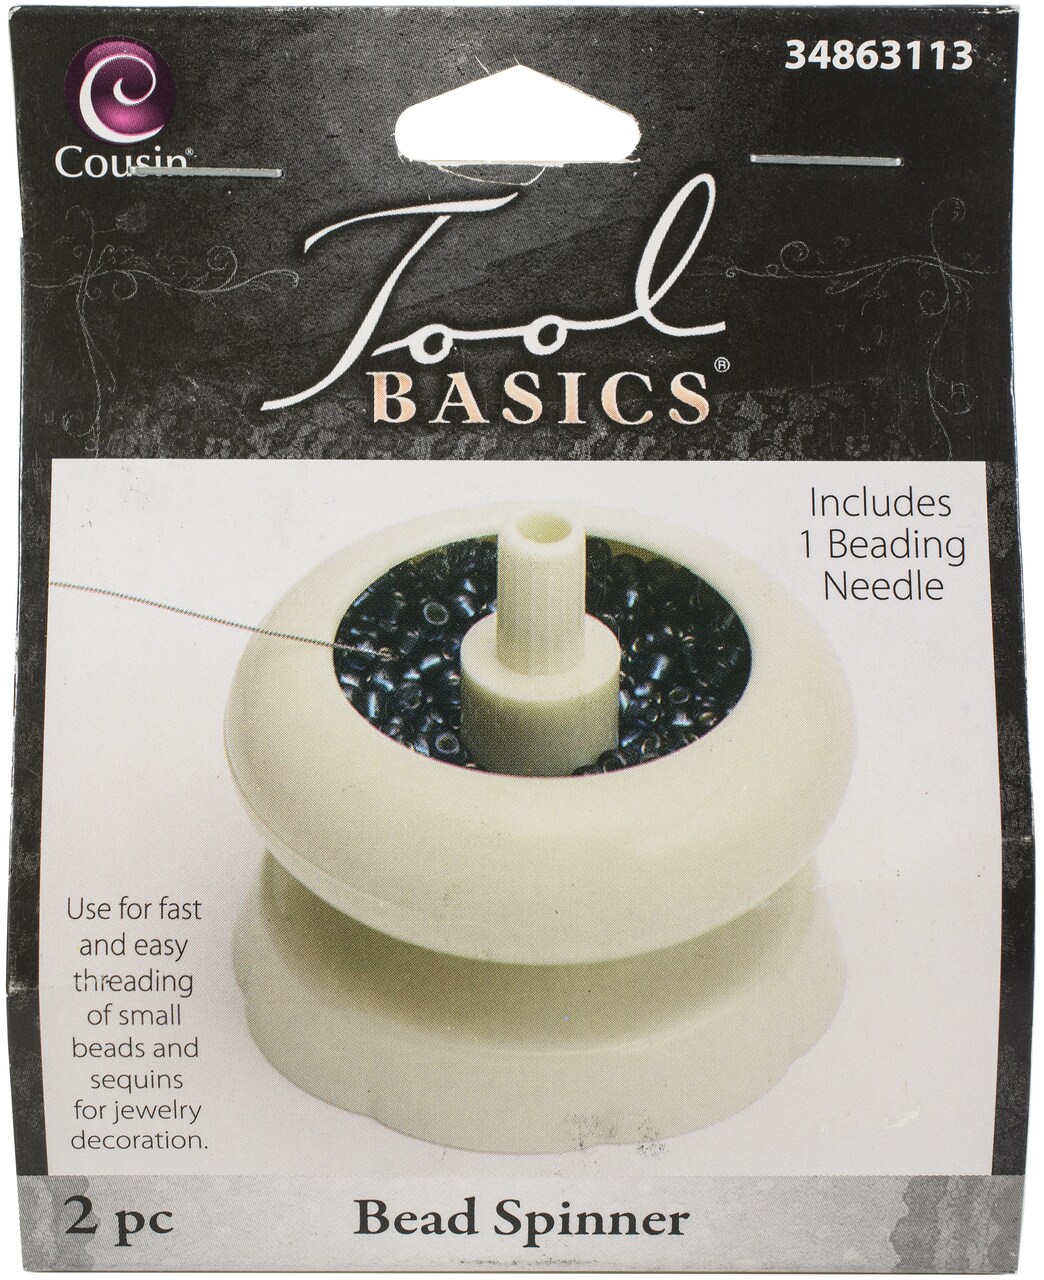 Bead & Blossom - Reviewing 11 Electric Bead Spinner Models - Learn French  Beading